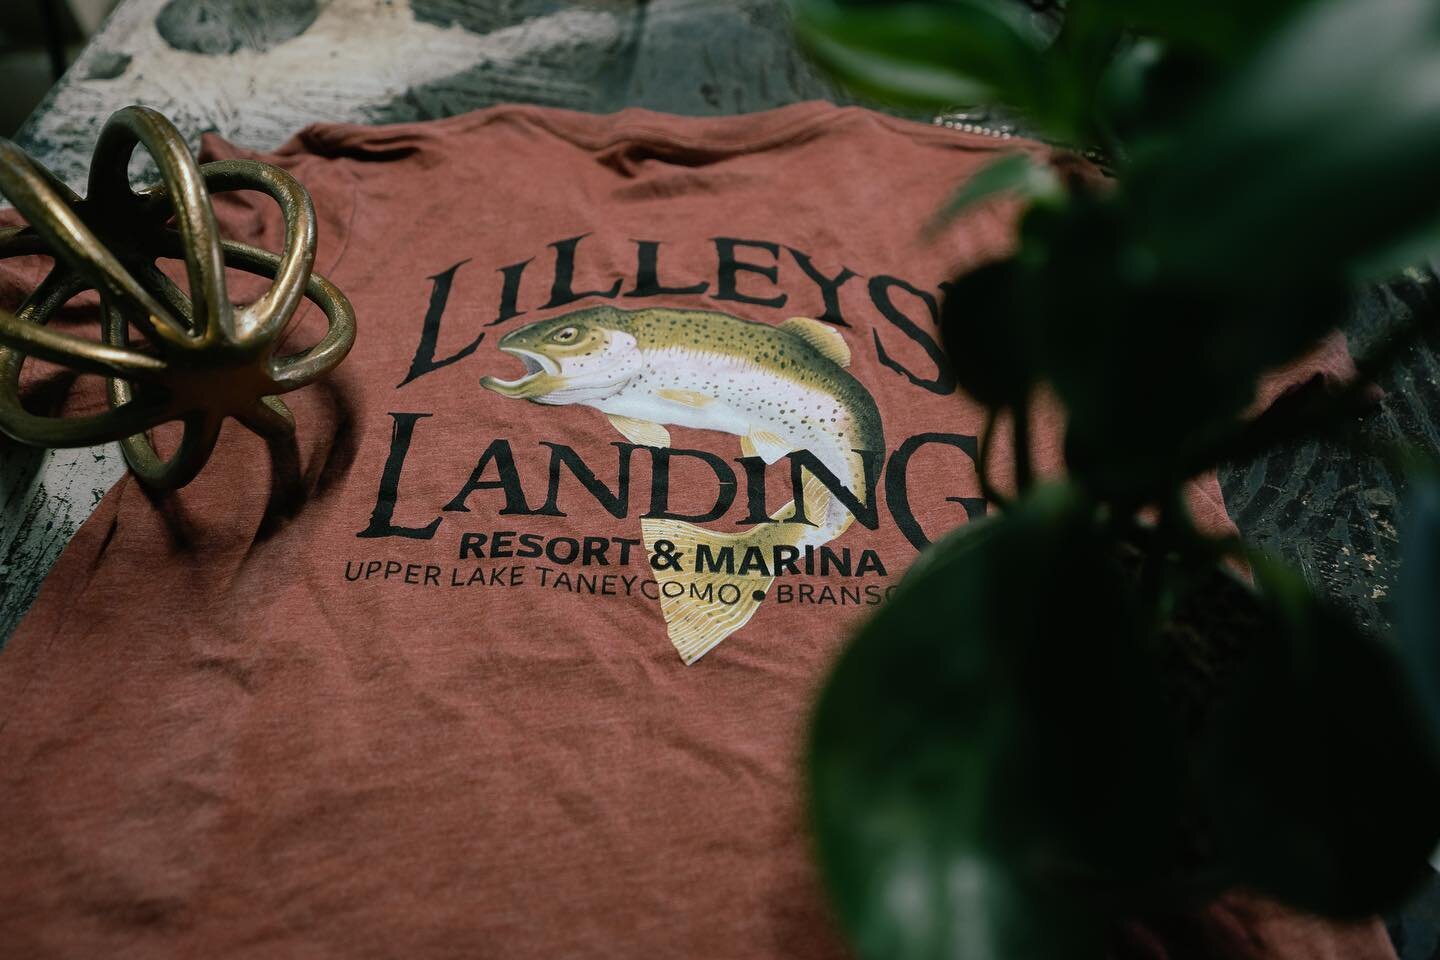 A nice 7 color classic for our friends at Lilley&rsquo;s Landing! 

&bull;

#screenprint #screenprinting #ryonet #roq #roqlife #printlife #lake #fishing #lilleyslanding #midwest #bransonmissouri #branson